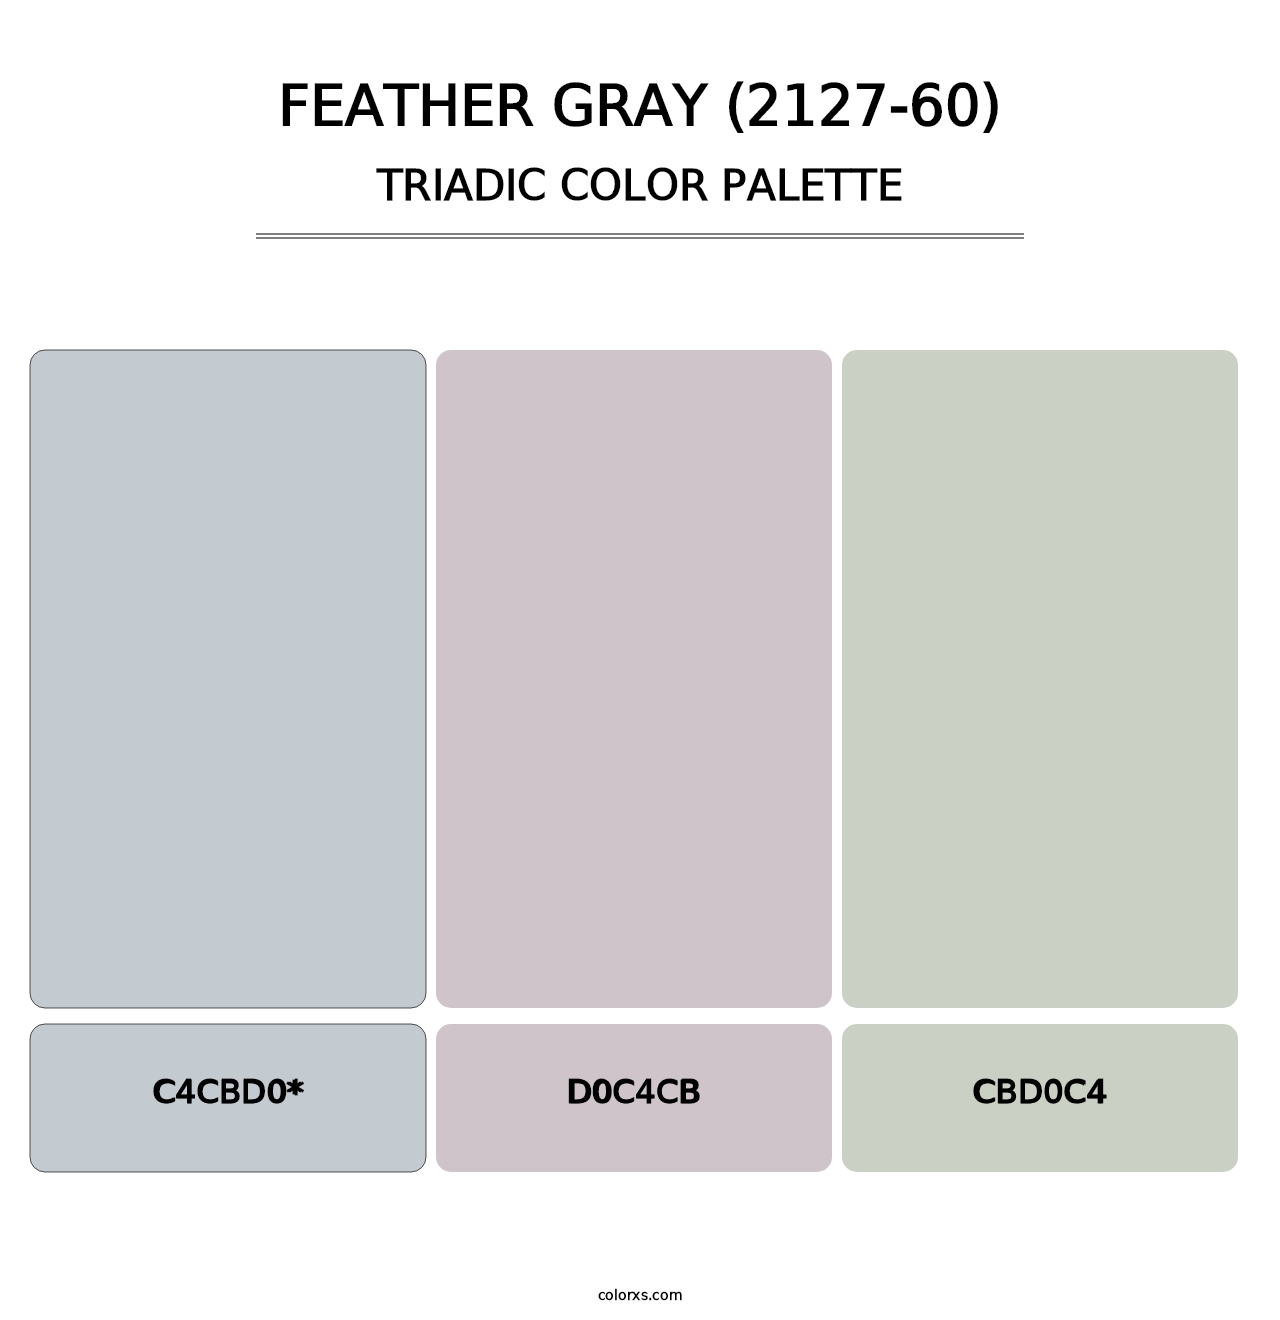 Feather Gray (2127-60) - Triadic Color Palette